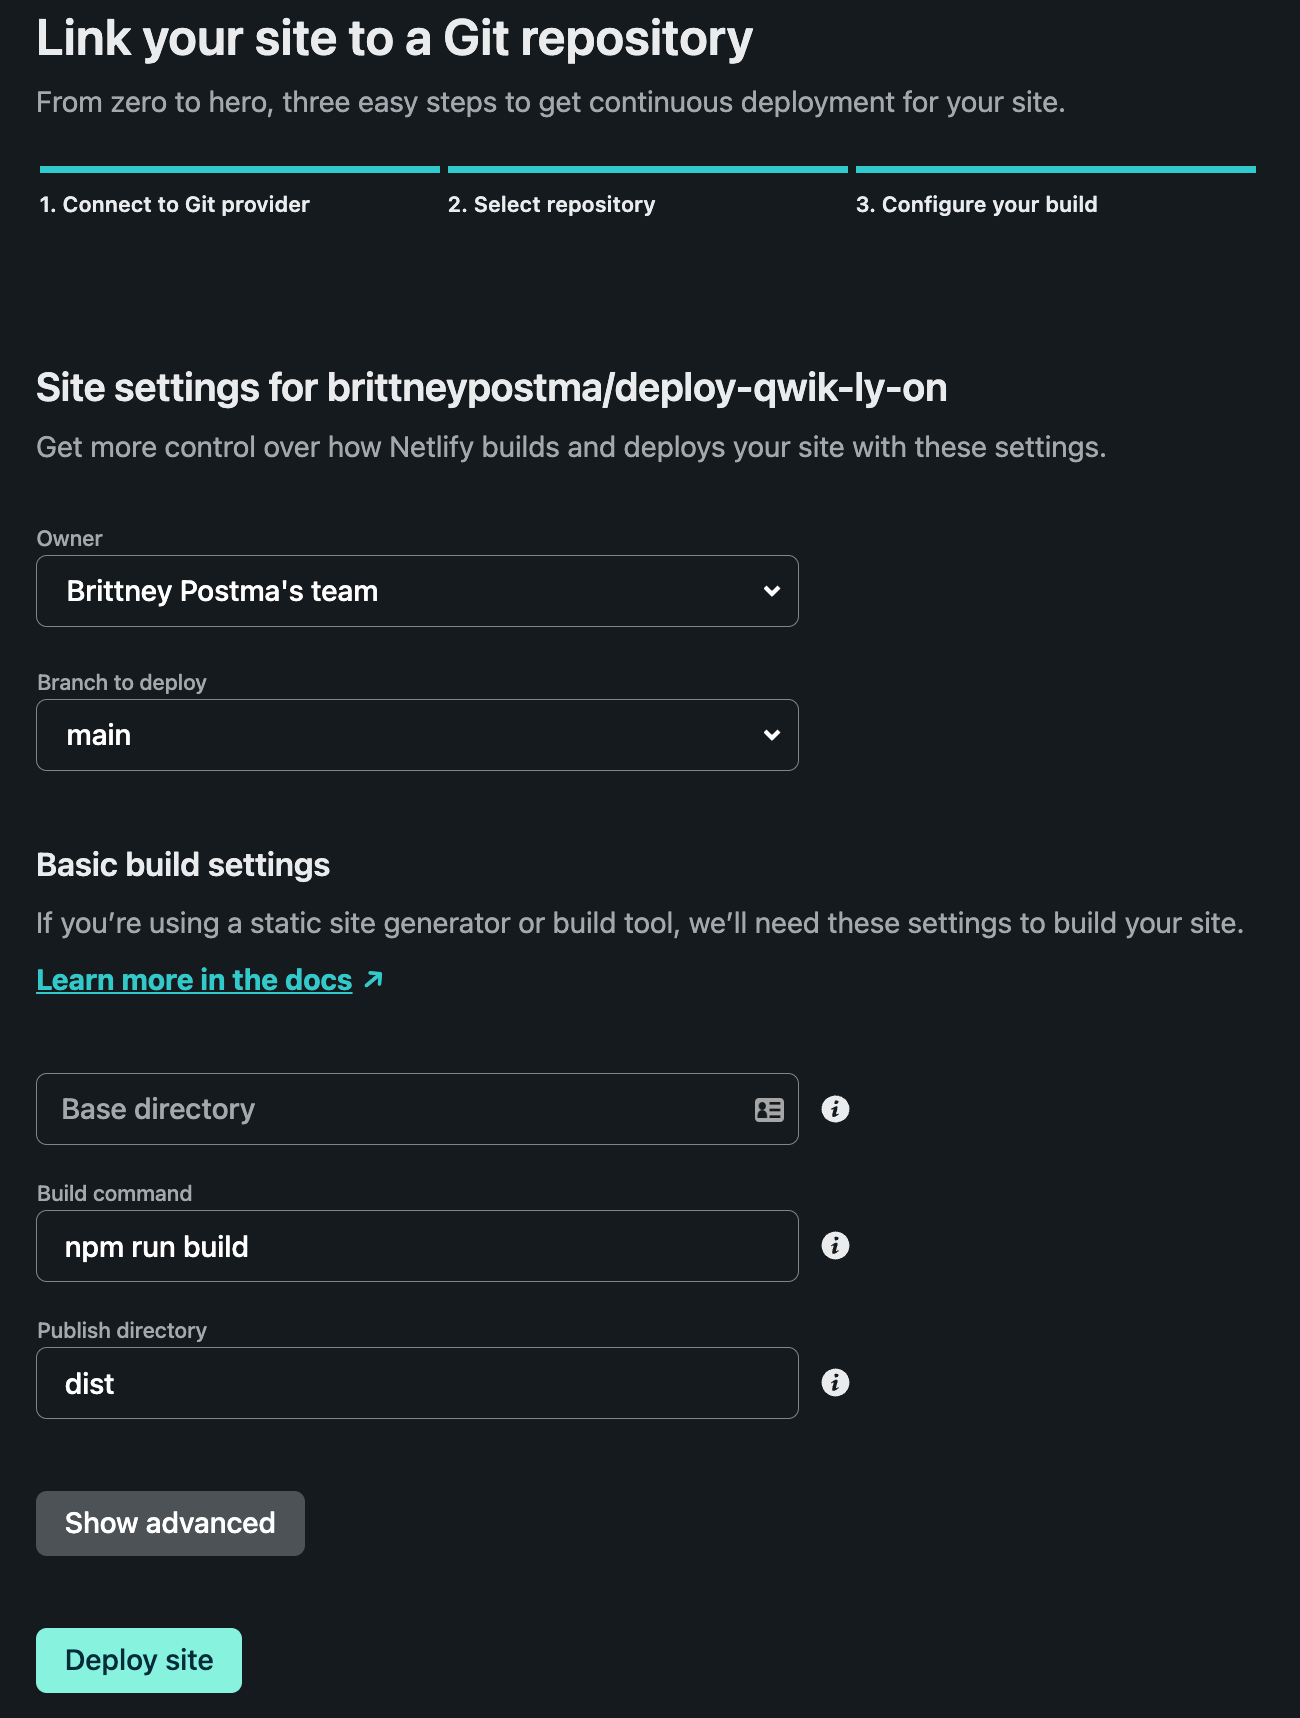 Link your site to a Git repository and setup the build settings